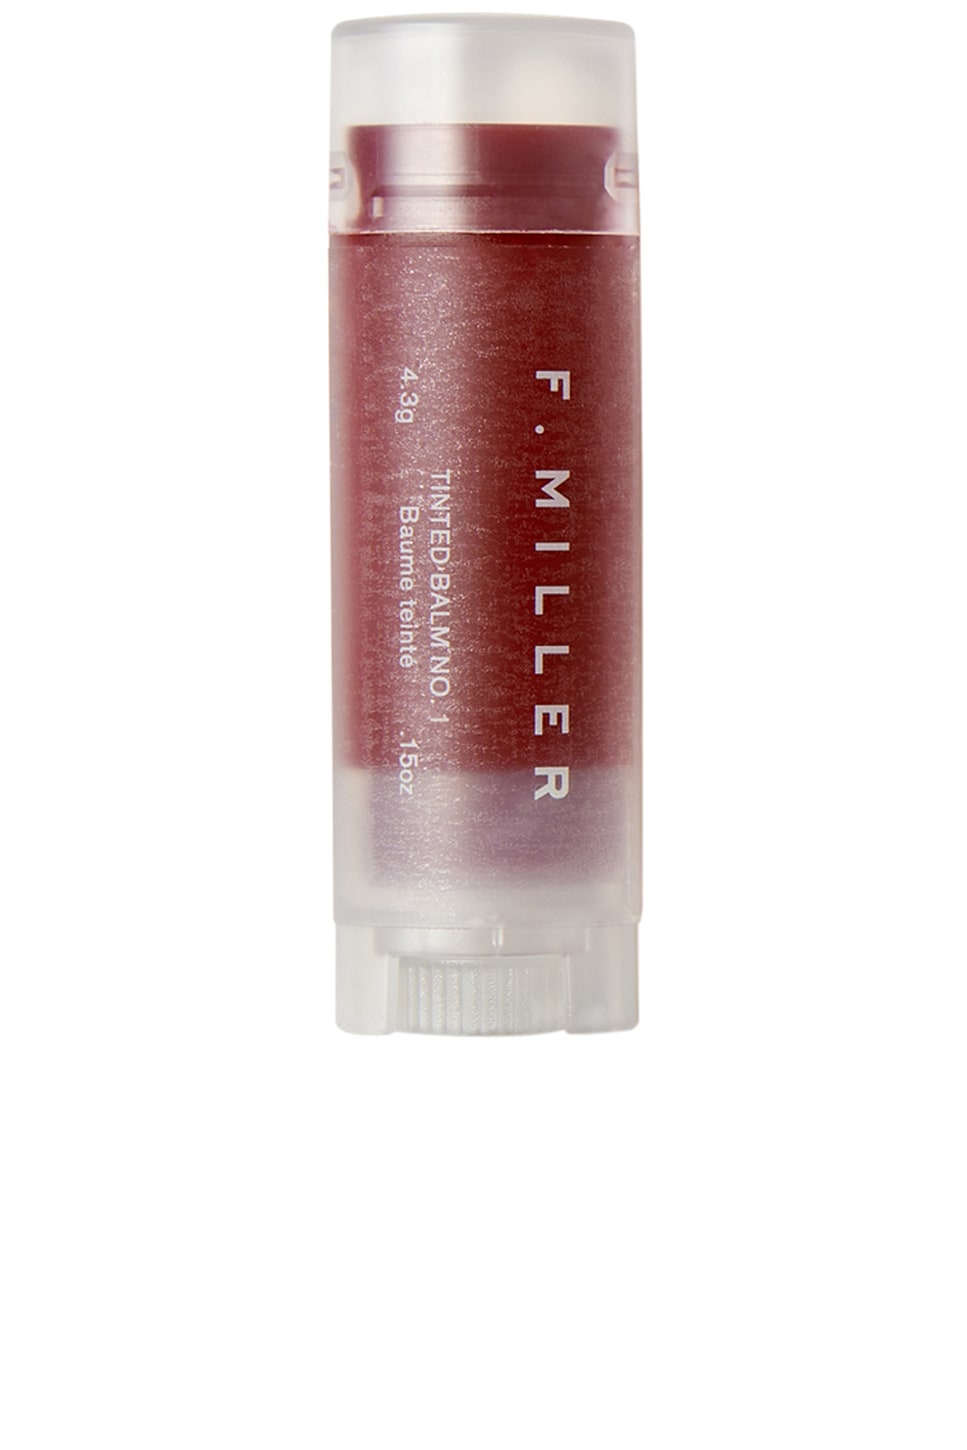 Tinted Balm No.1 in Wine